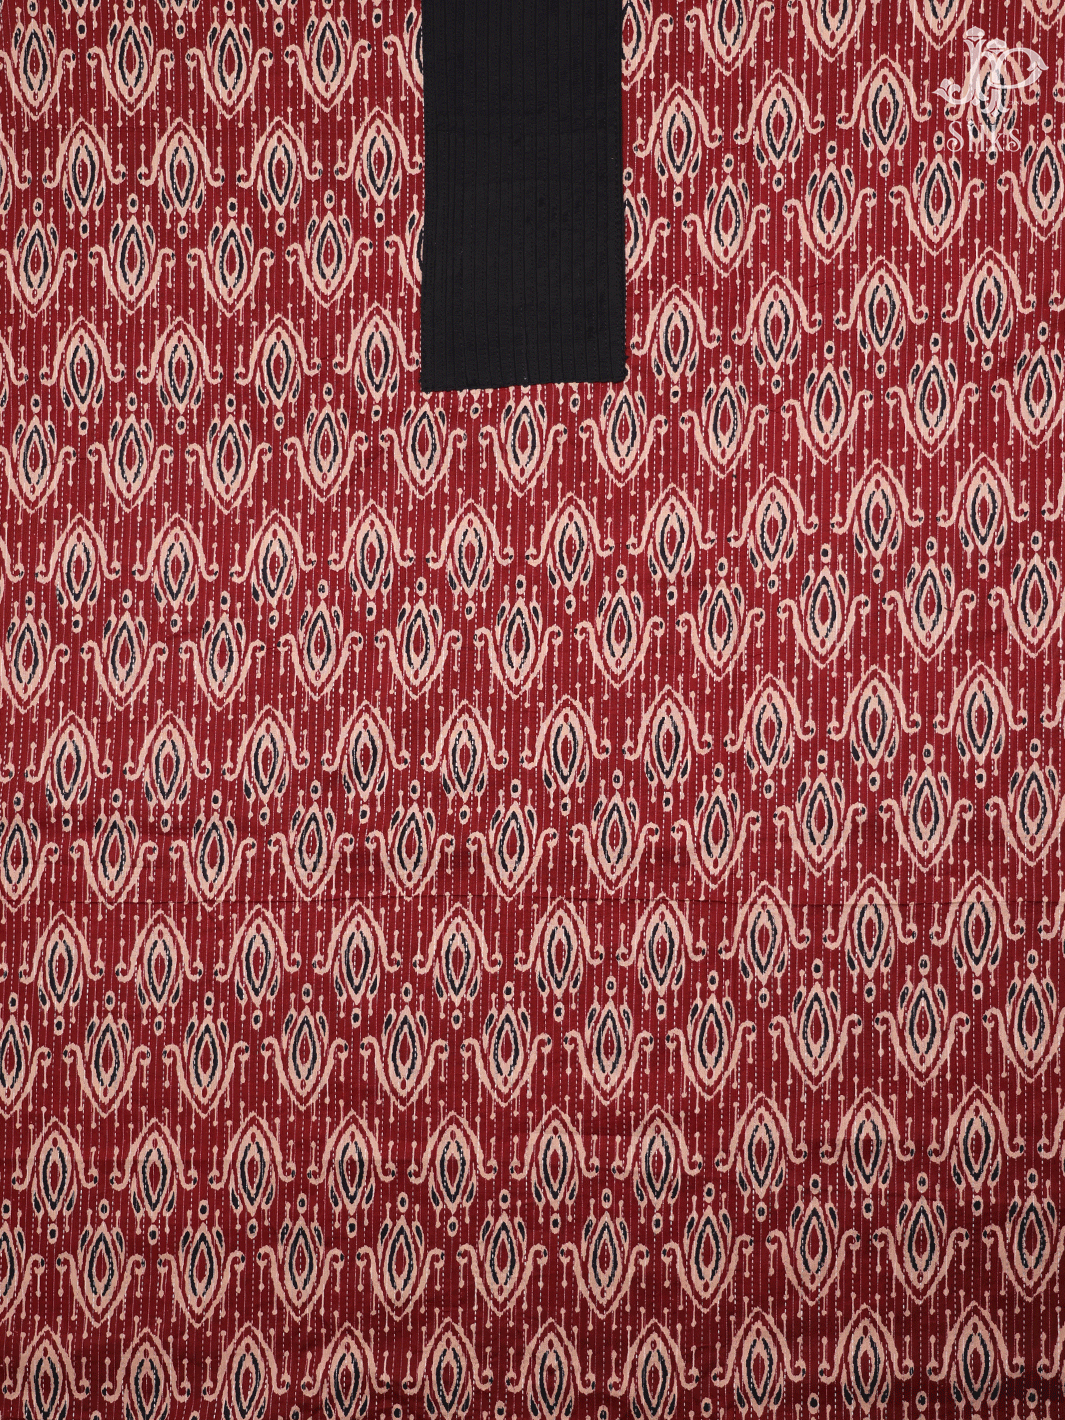 Maroon and Black Cotton Chudidhar Material - E6126 - View 2